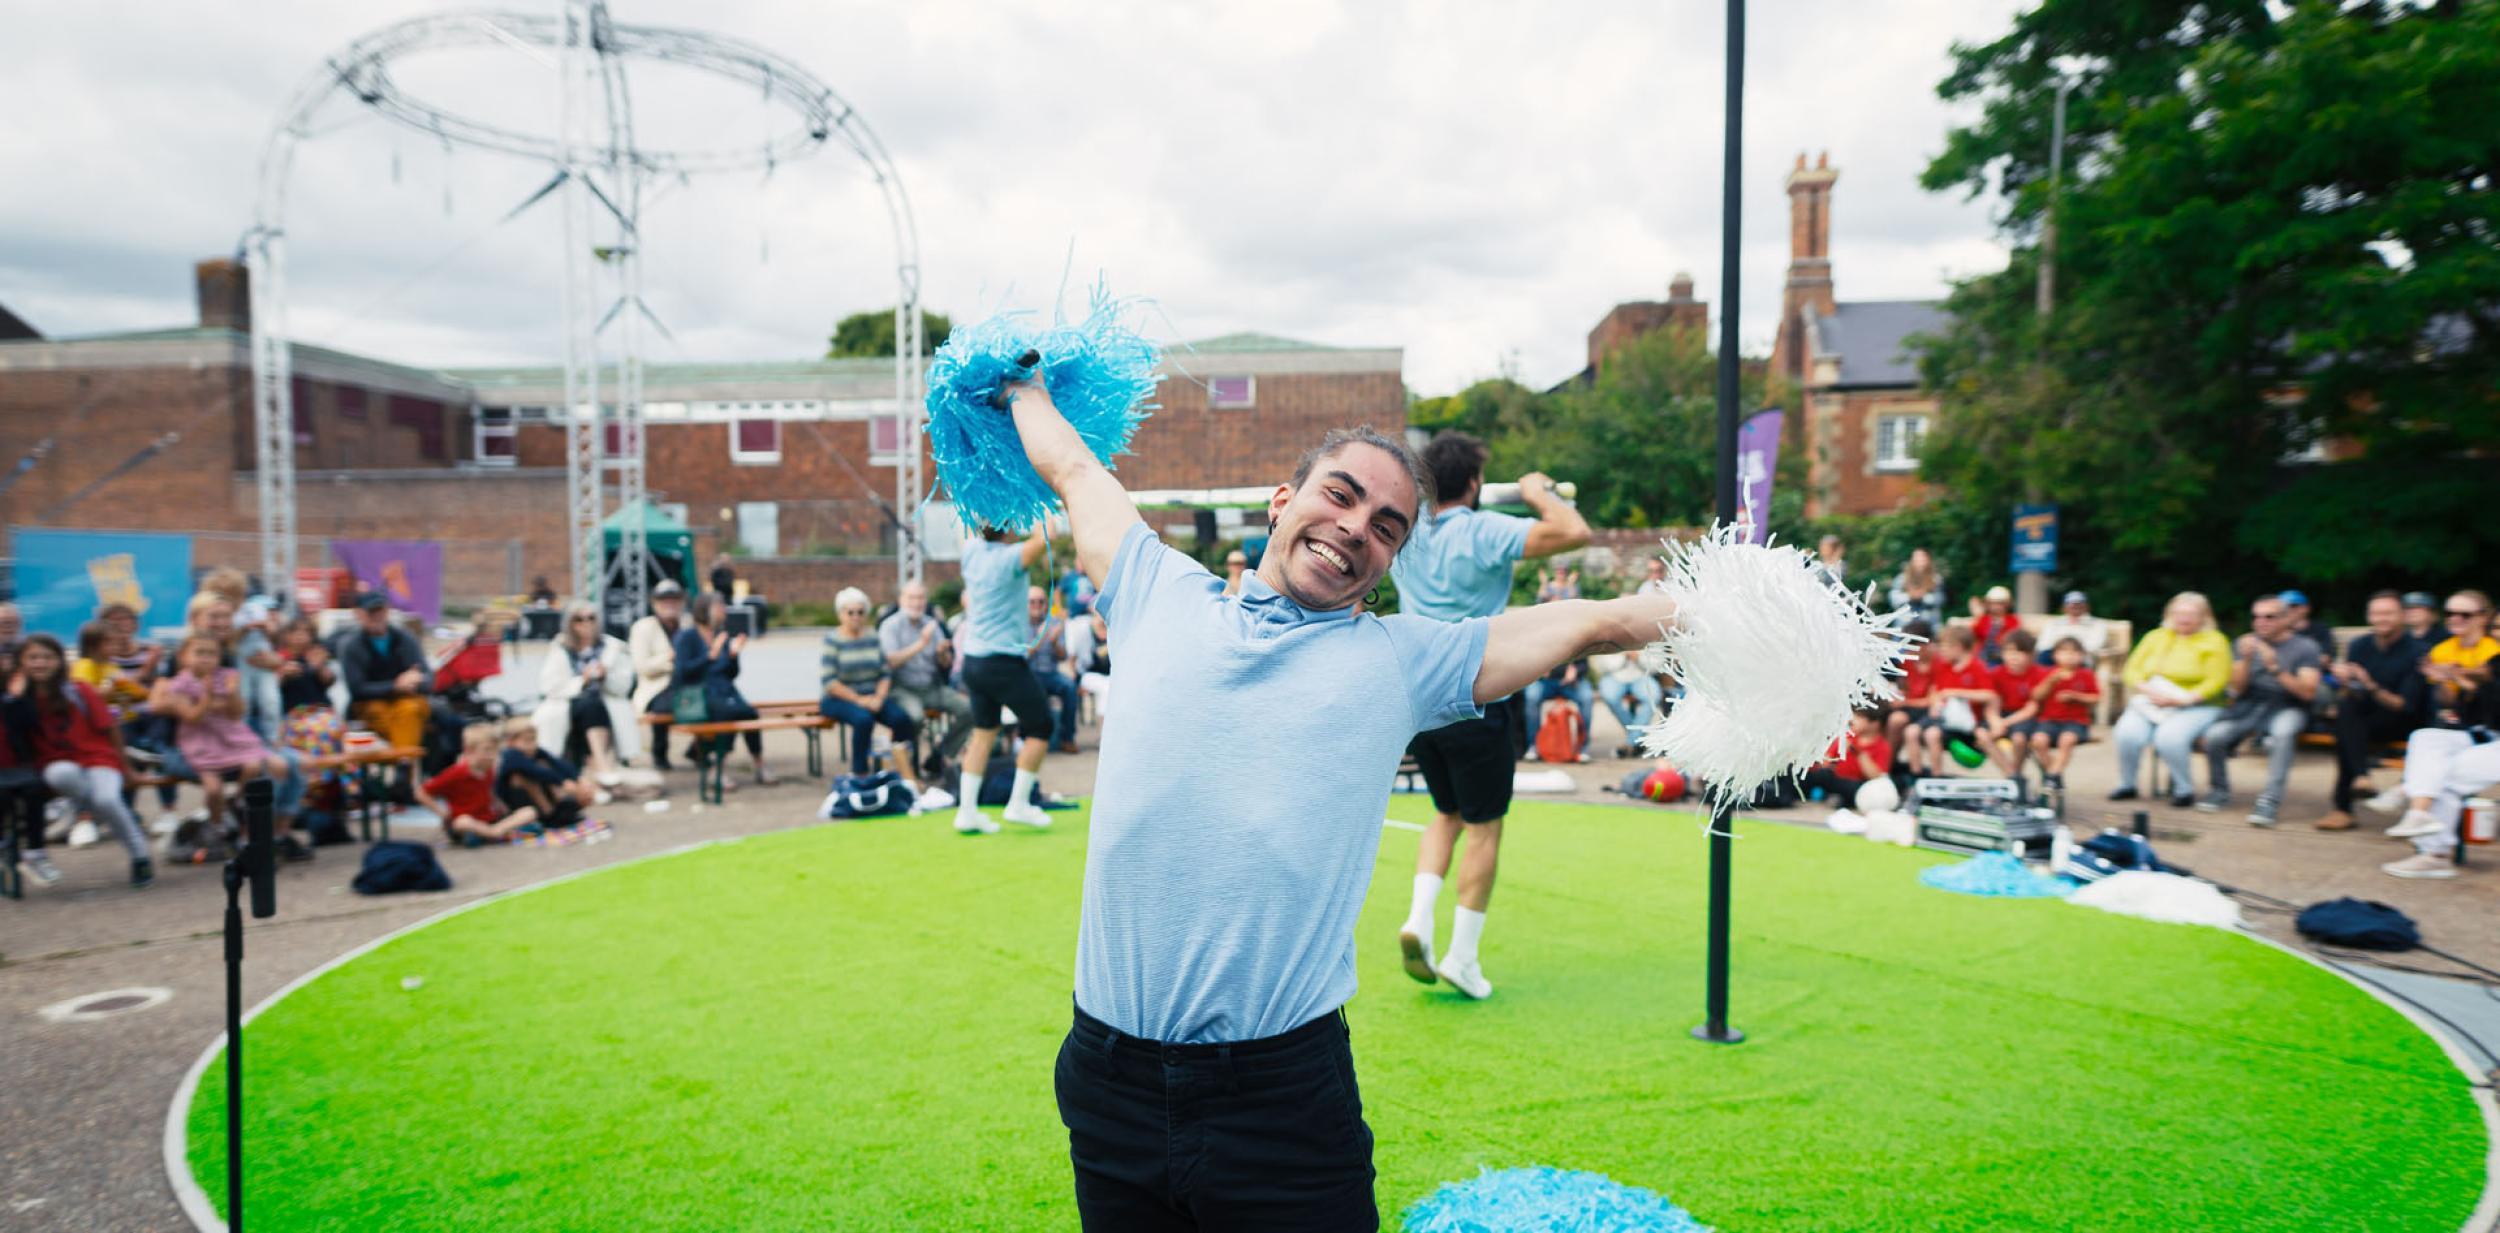 A person dressed in a blue polo top and dark blue shorts waving pom poms and performing outdoors on a green carpet stage